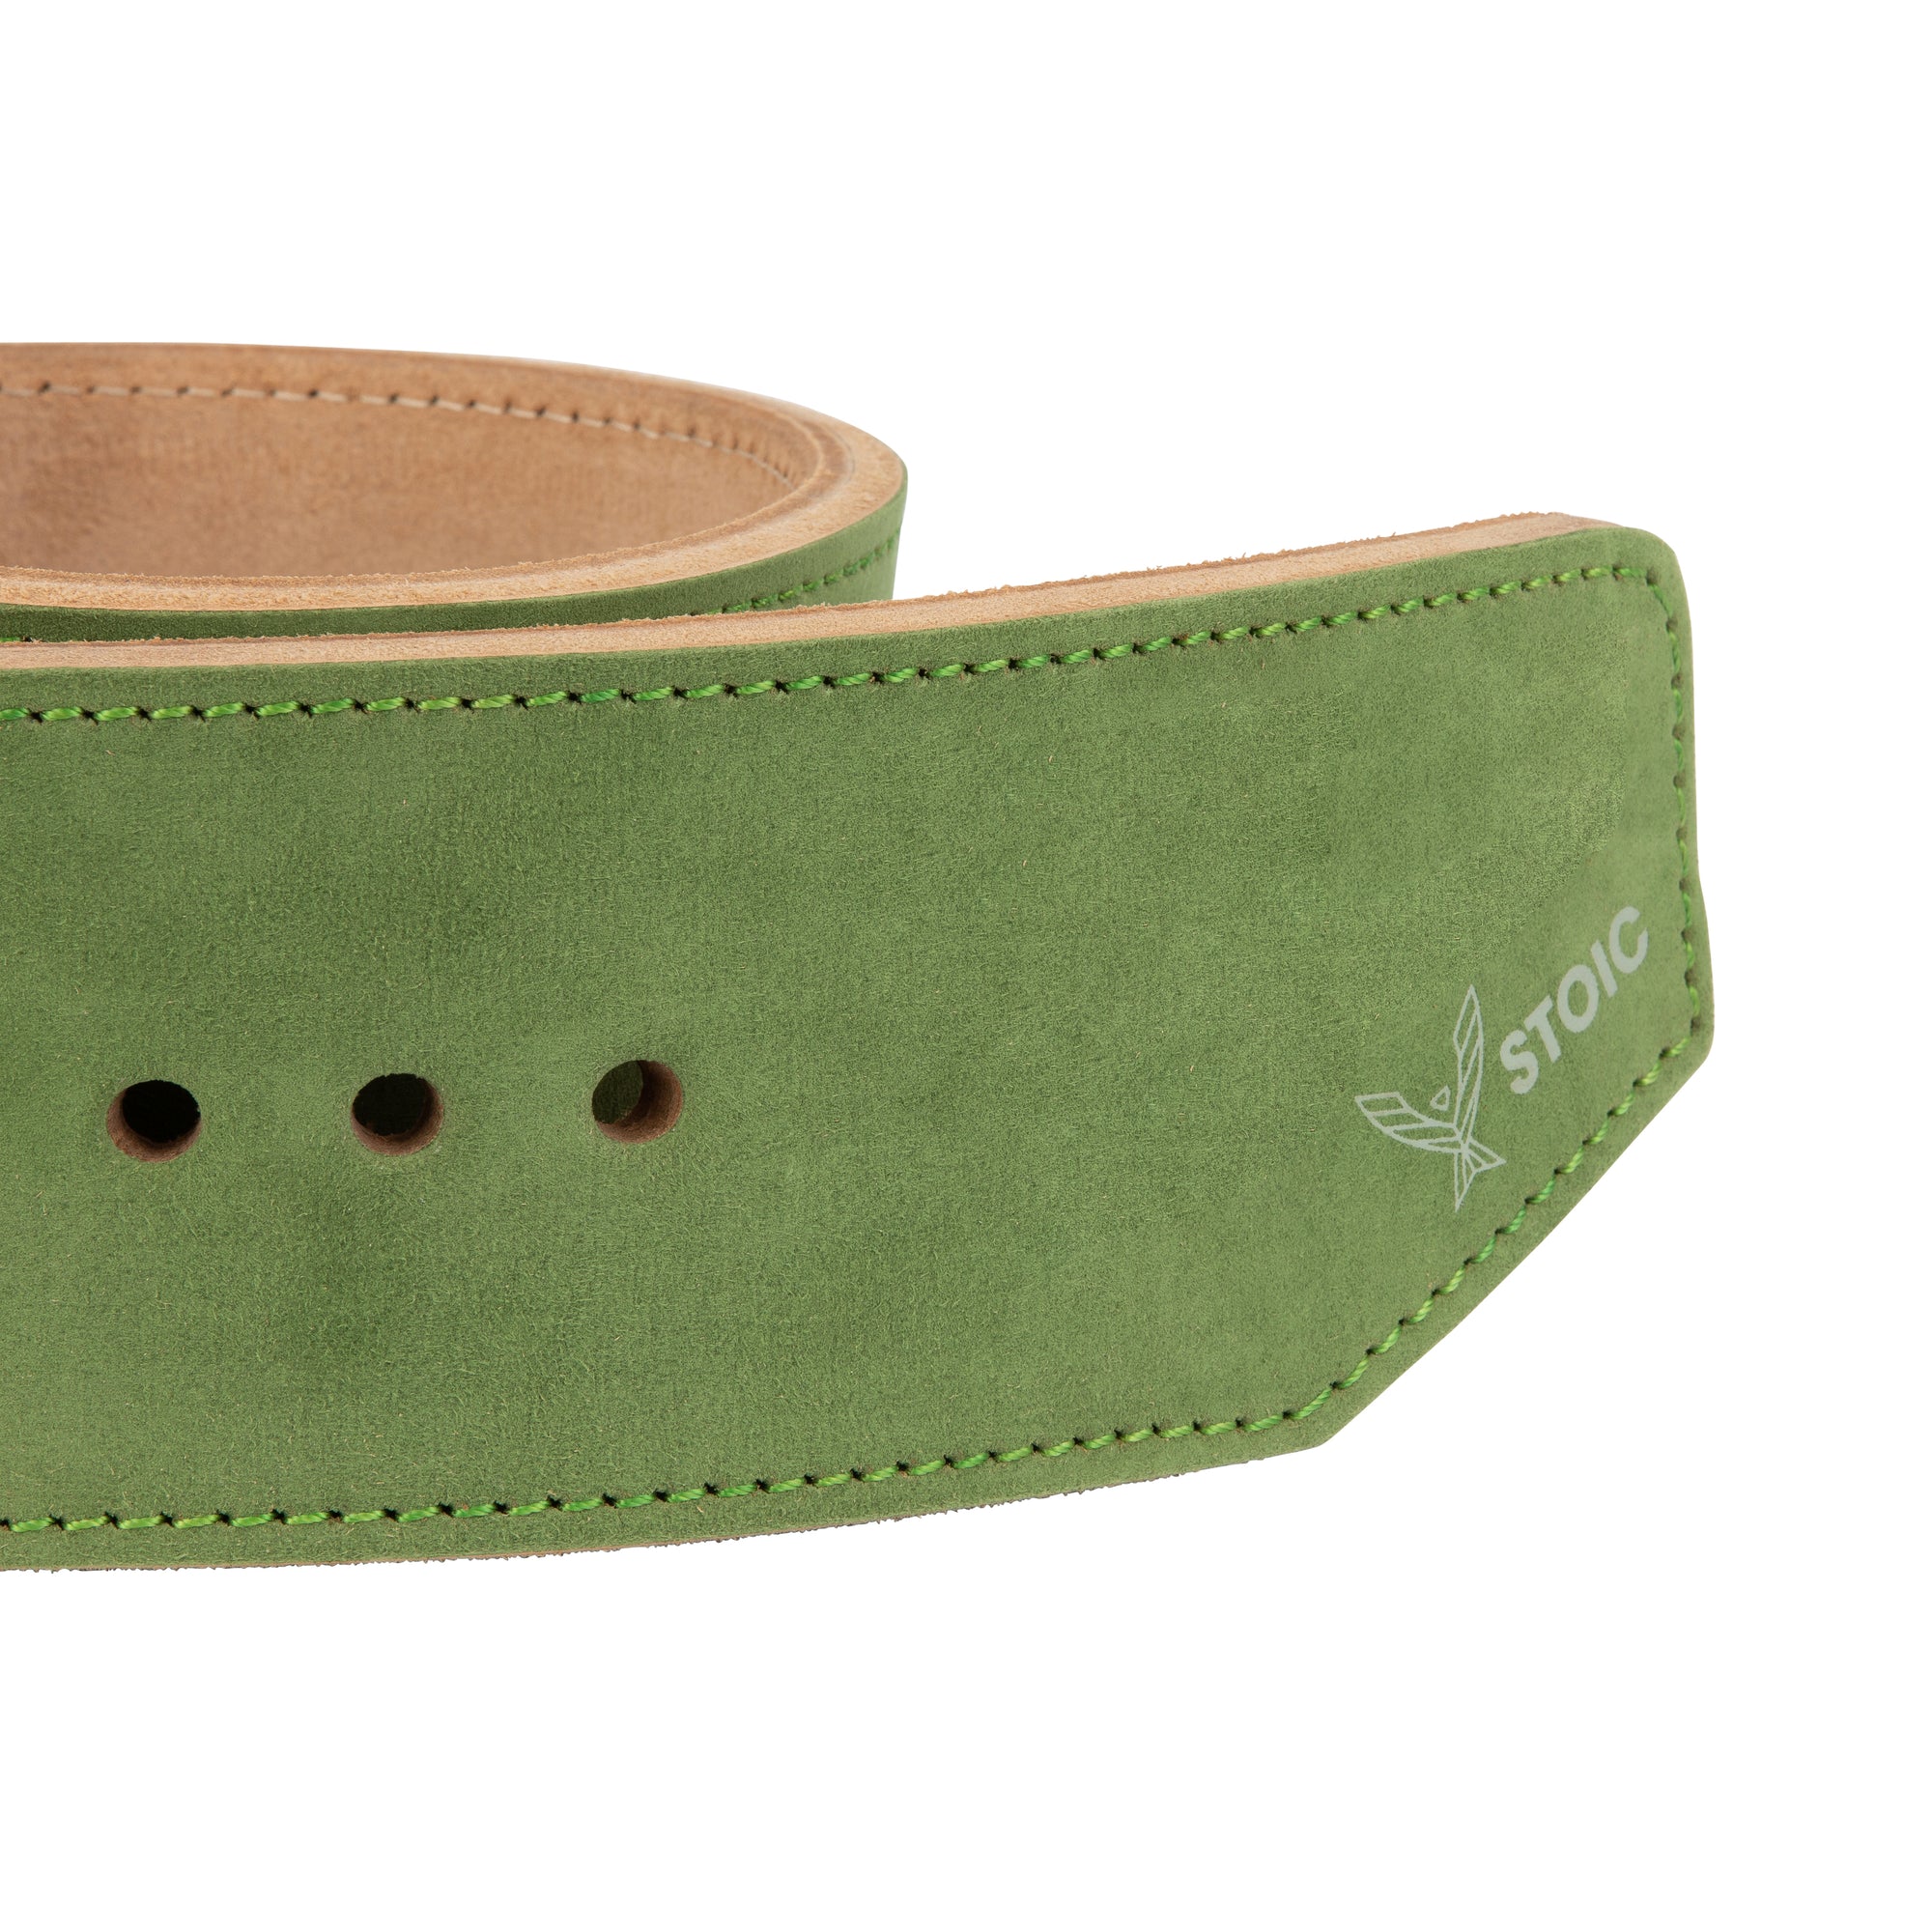 Stoic Powerlifting Prong Belt (10mm) - Olive Drab